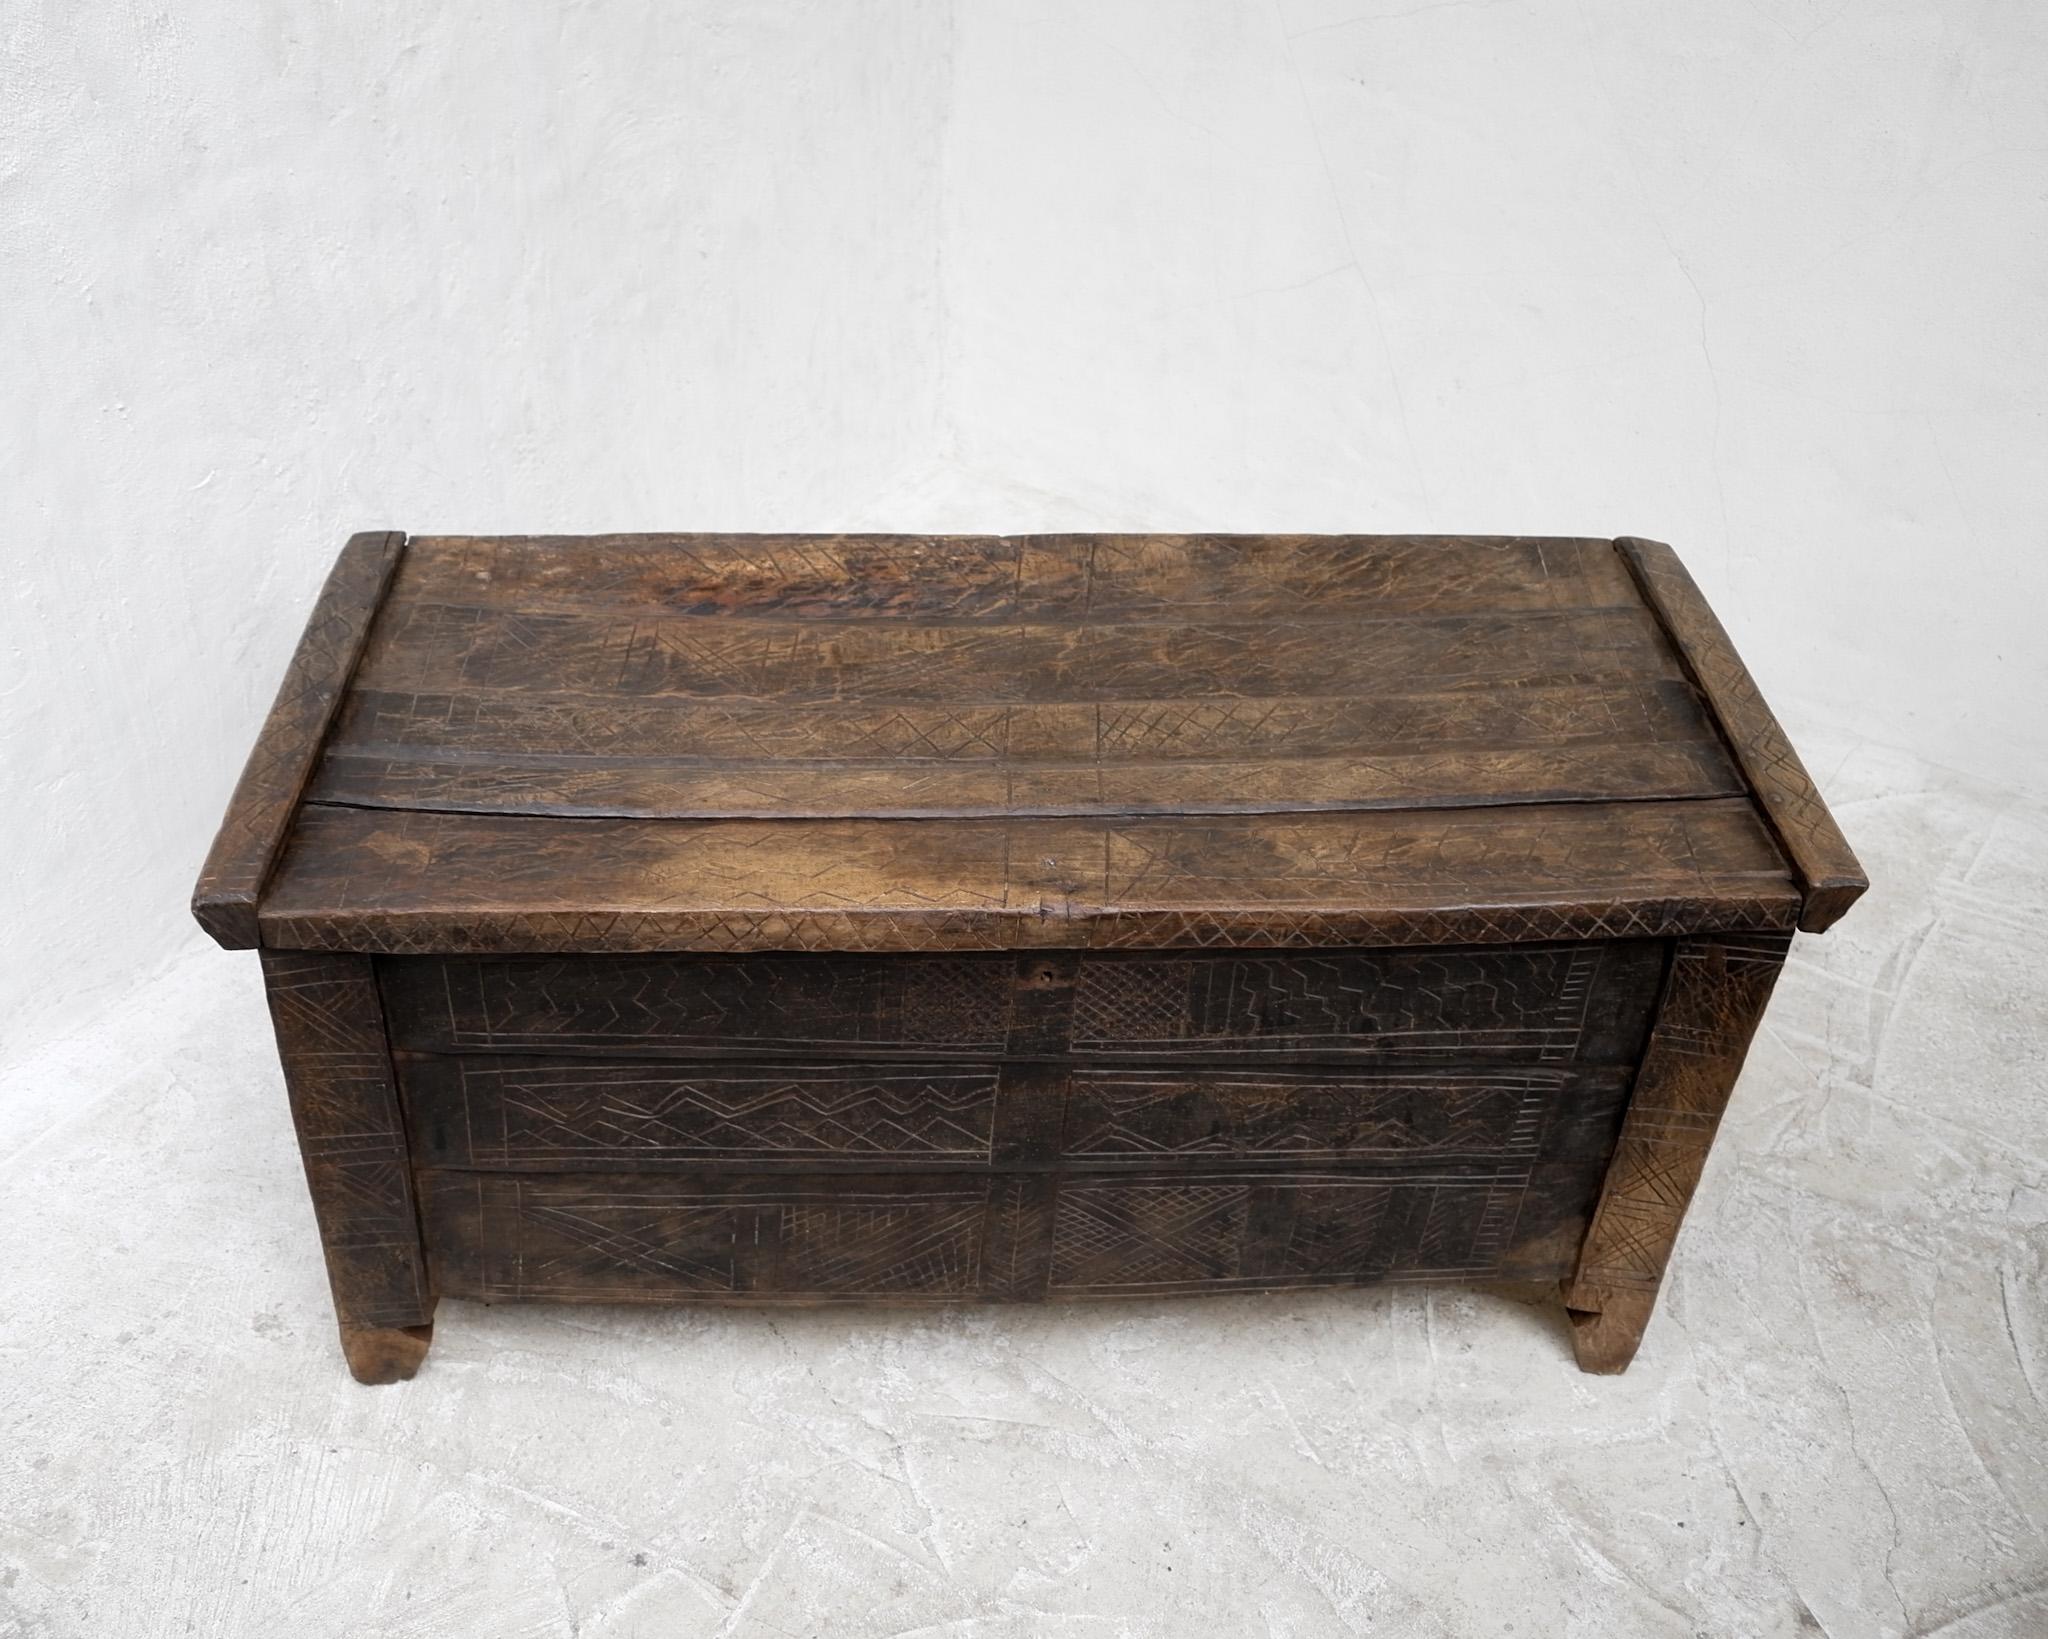 An exceptional heavily patinated hewn beech coffer from Transylvania.

Hand carved klan markings to front.

-

We offer free shipping to the USA/Canada through Fedex with this item.
